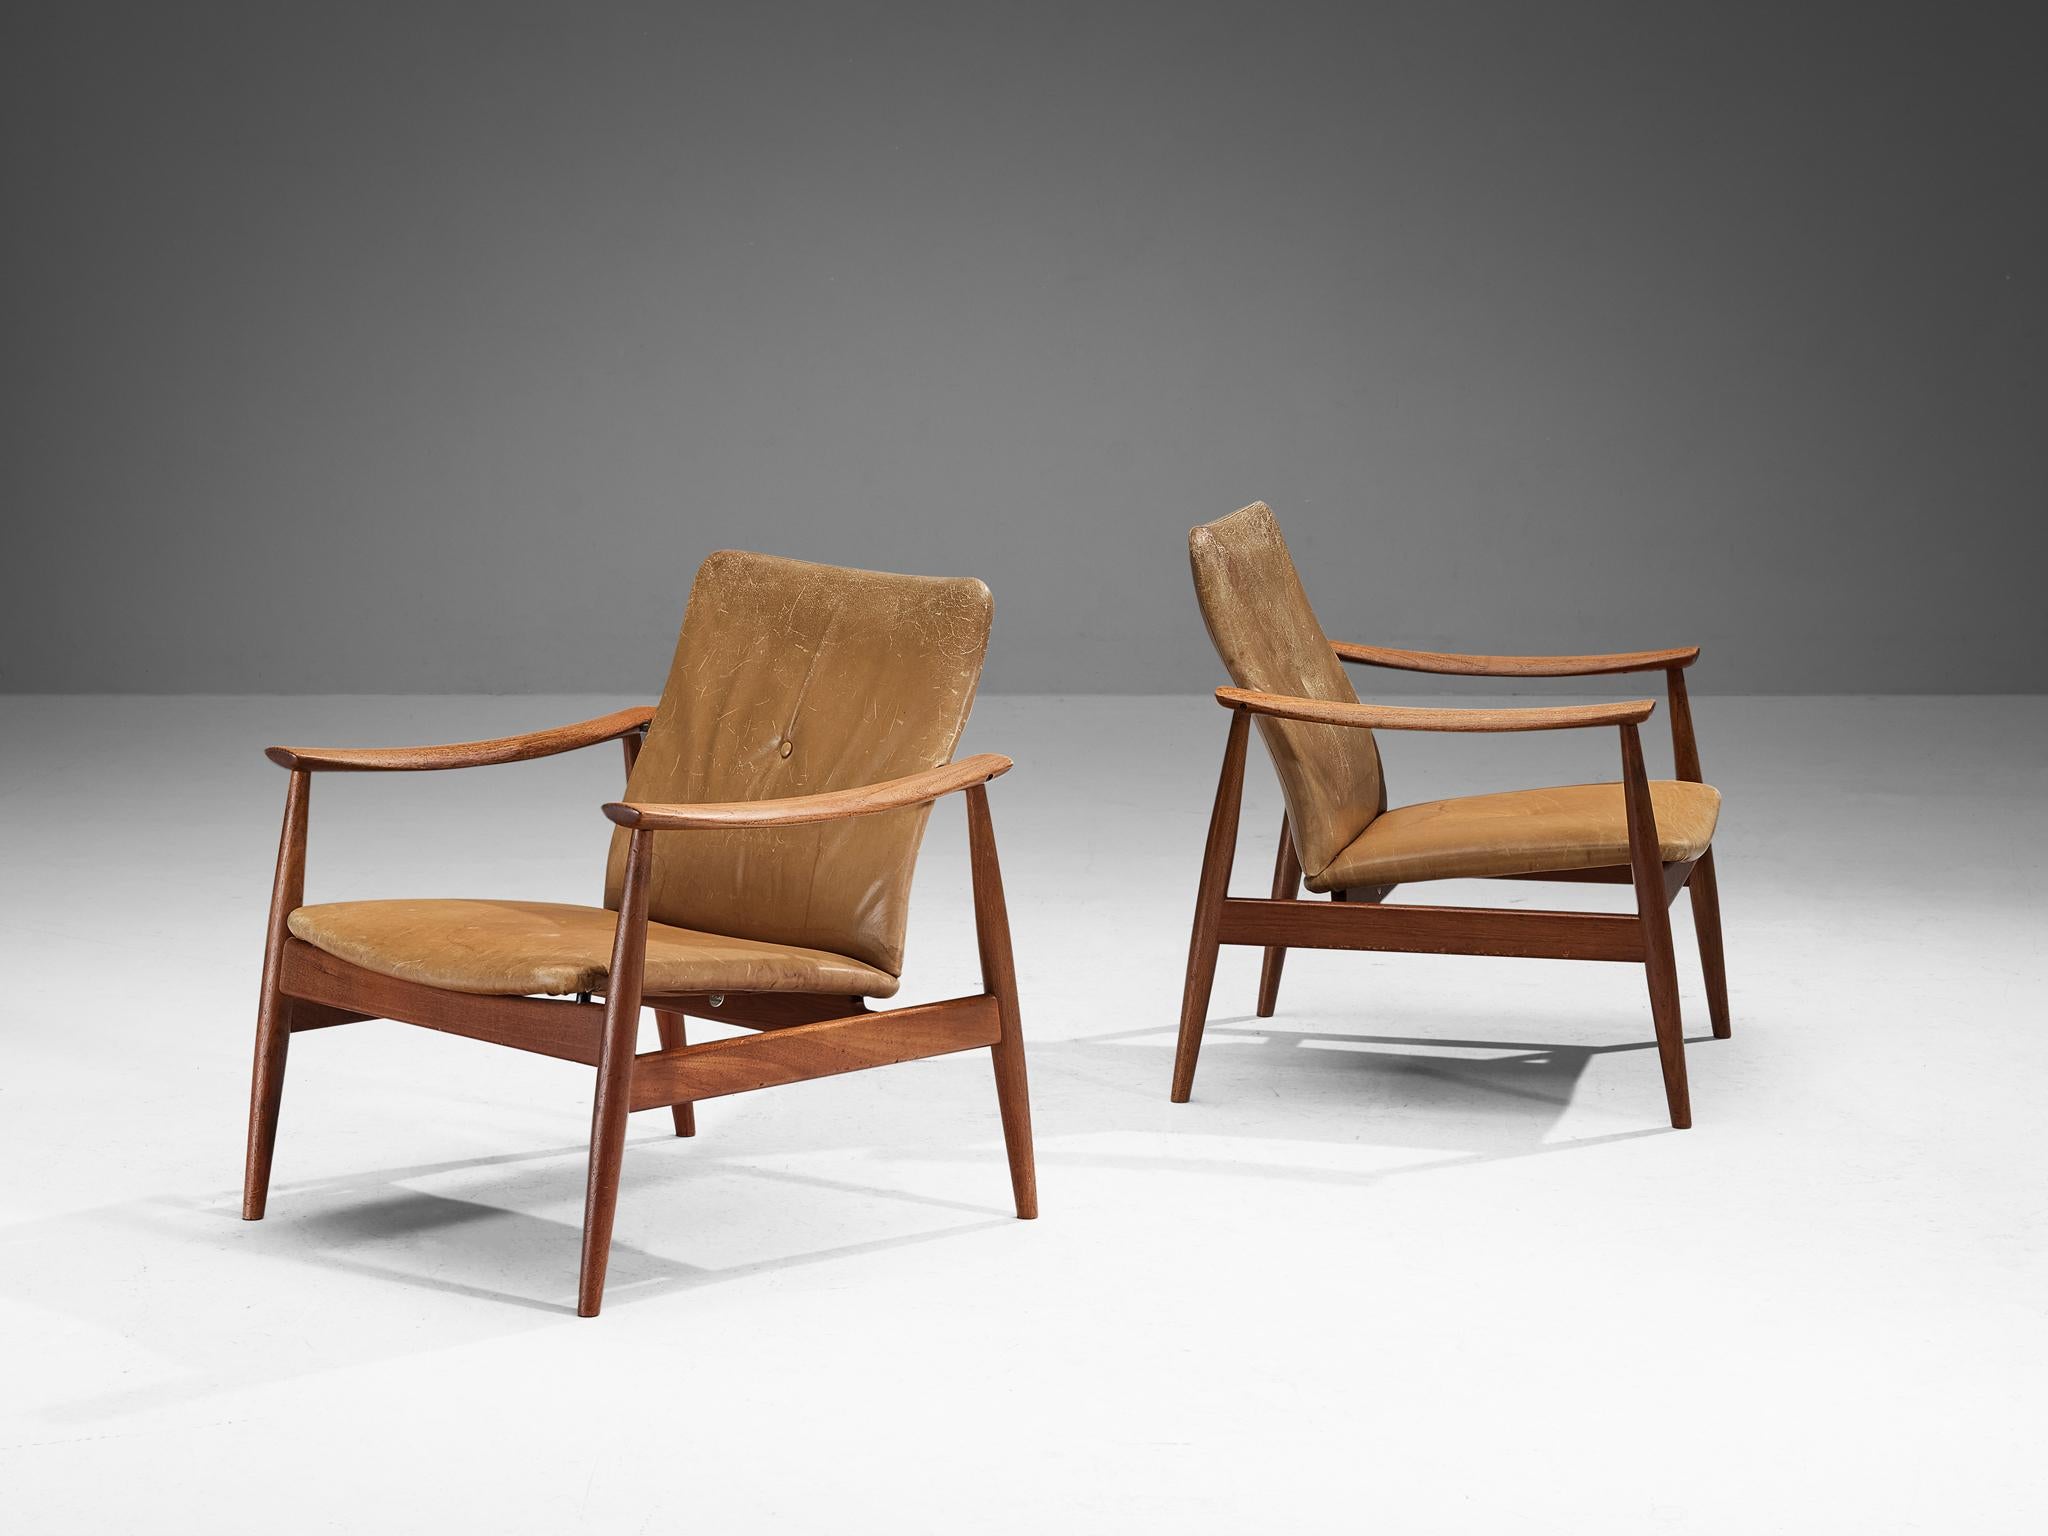 Finn Juhl for France & Søn, pair of no. 138 lounge chairs, teak, leather, Denmark, design ca. 1959

These easy chairs are designed by Danish master designer Finn Juhl in 1959. Defined by a sleek organic frame in a beautiful teak with its tapered